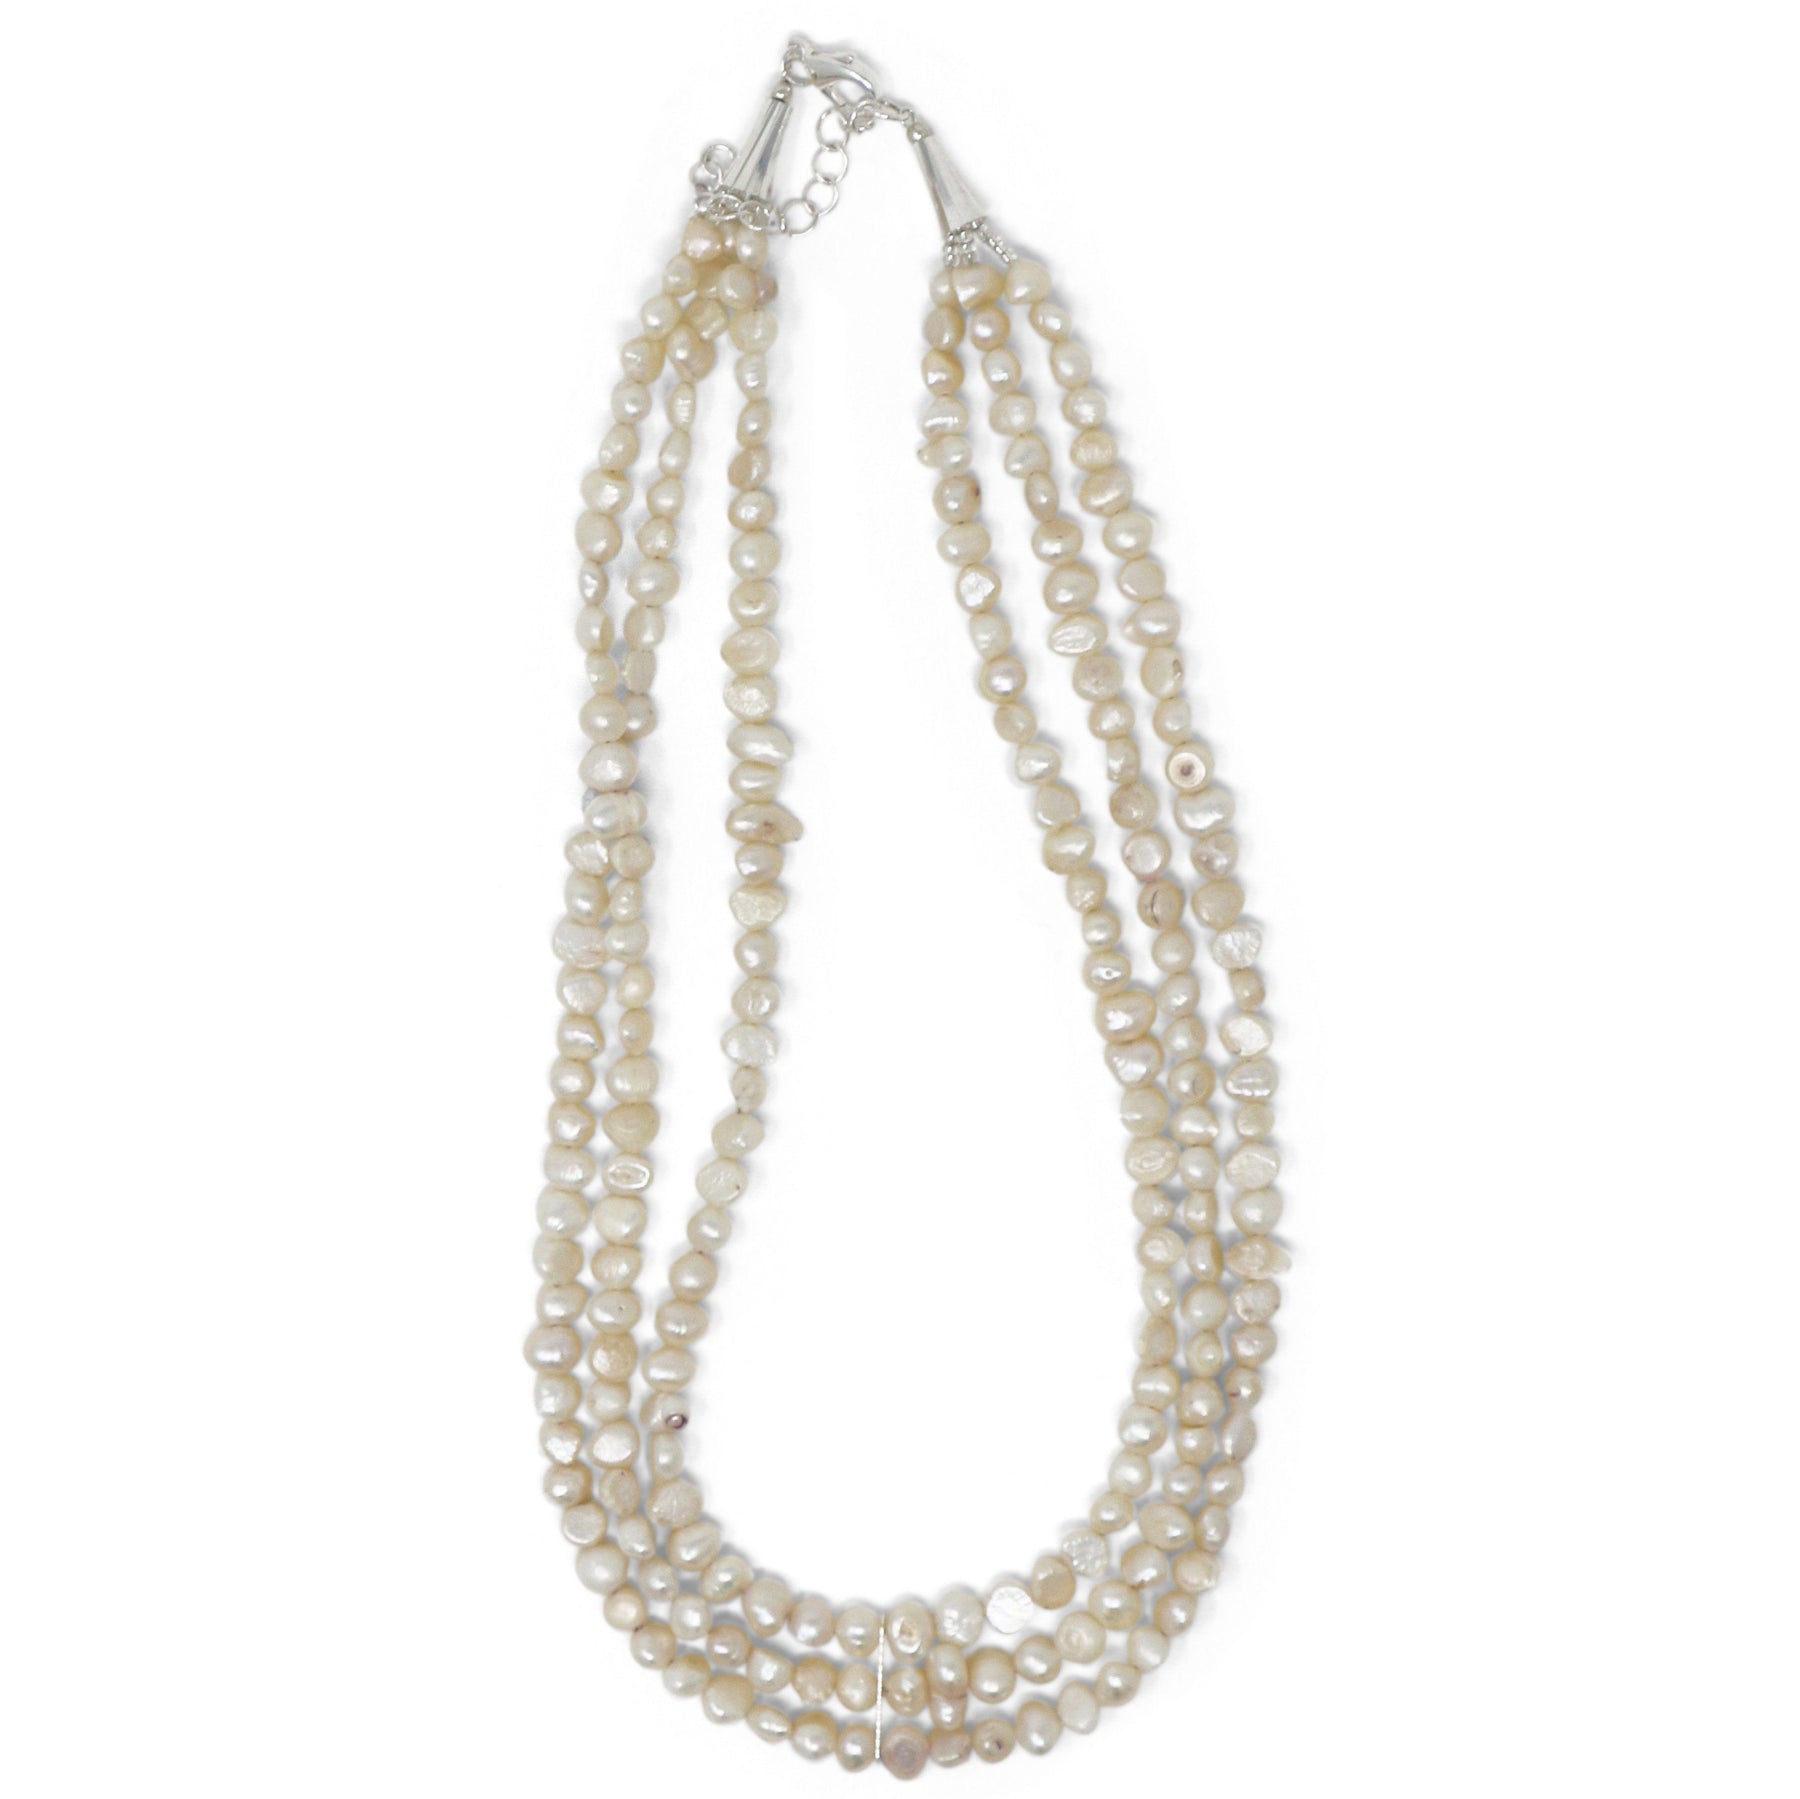 freshwater pearl necklace